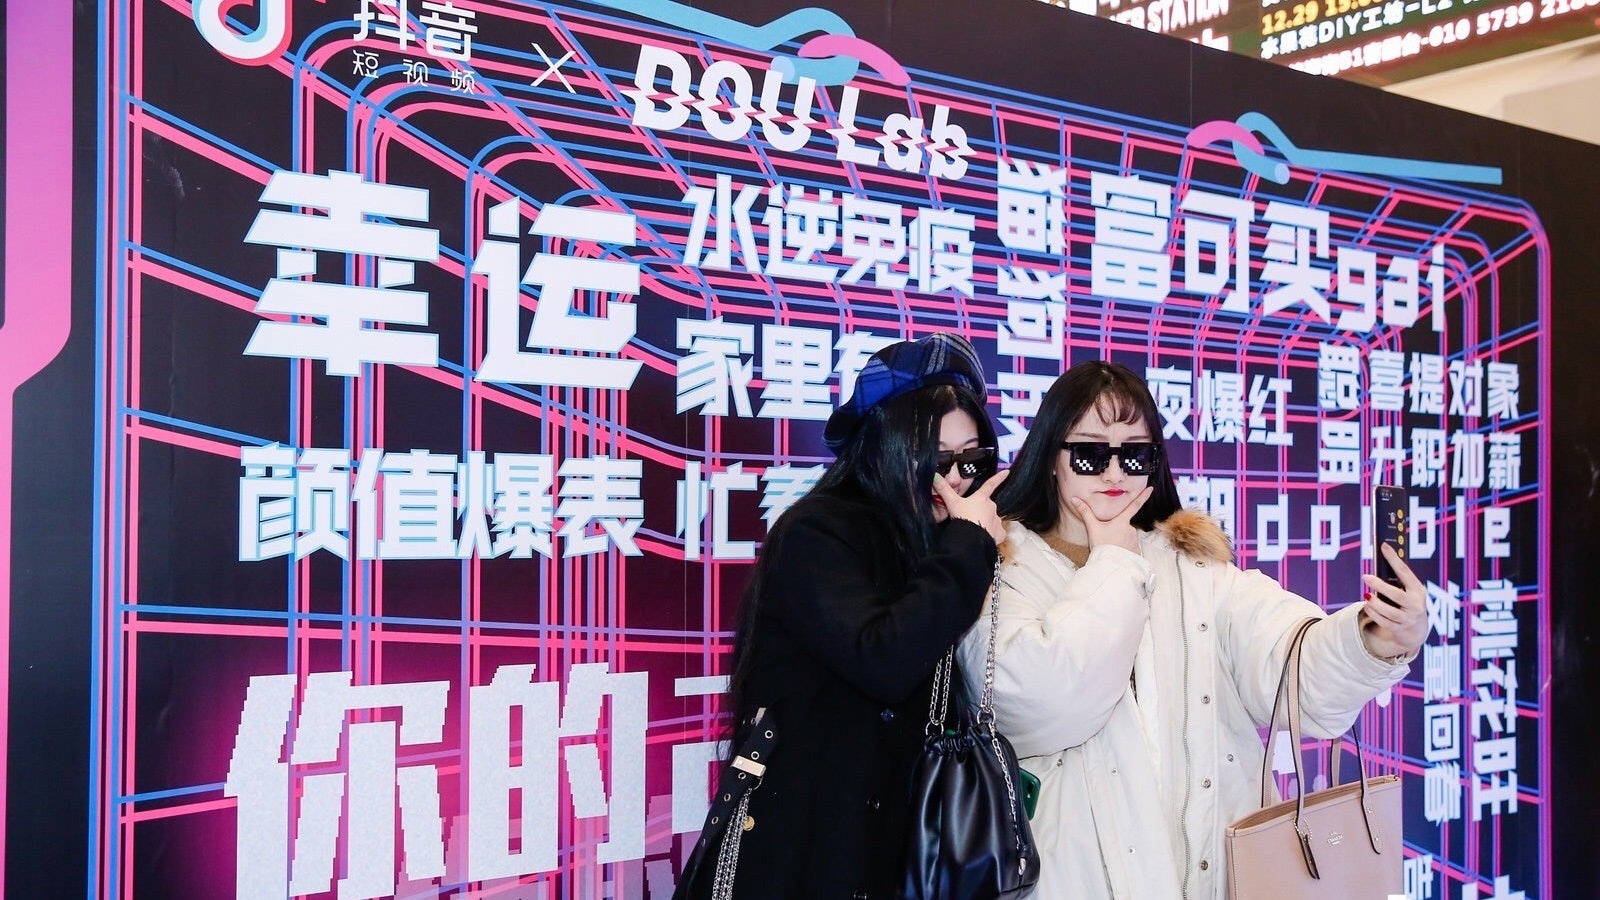 With the launch of new platform Pheagee, Douyin has made digital fashion its new battleground. Can it secure this untapped market? Photo: Douyin